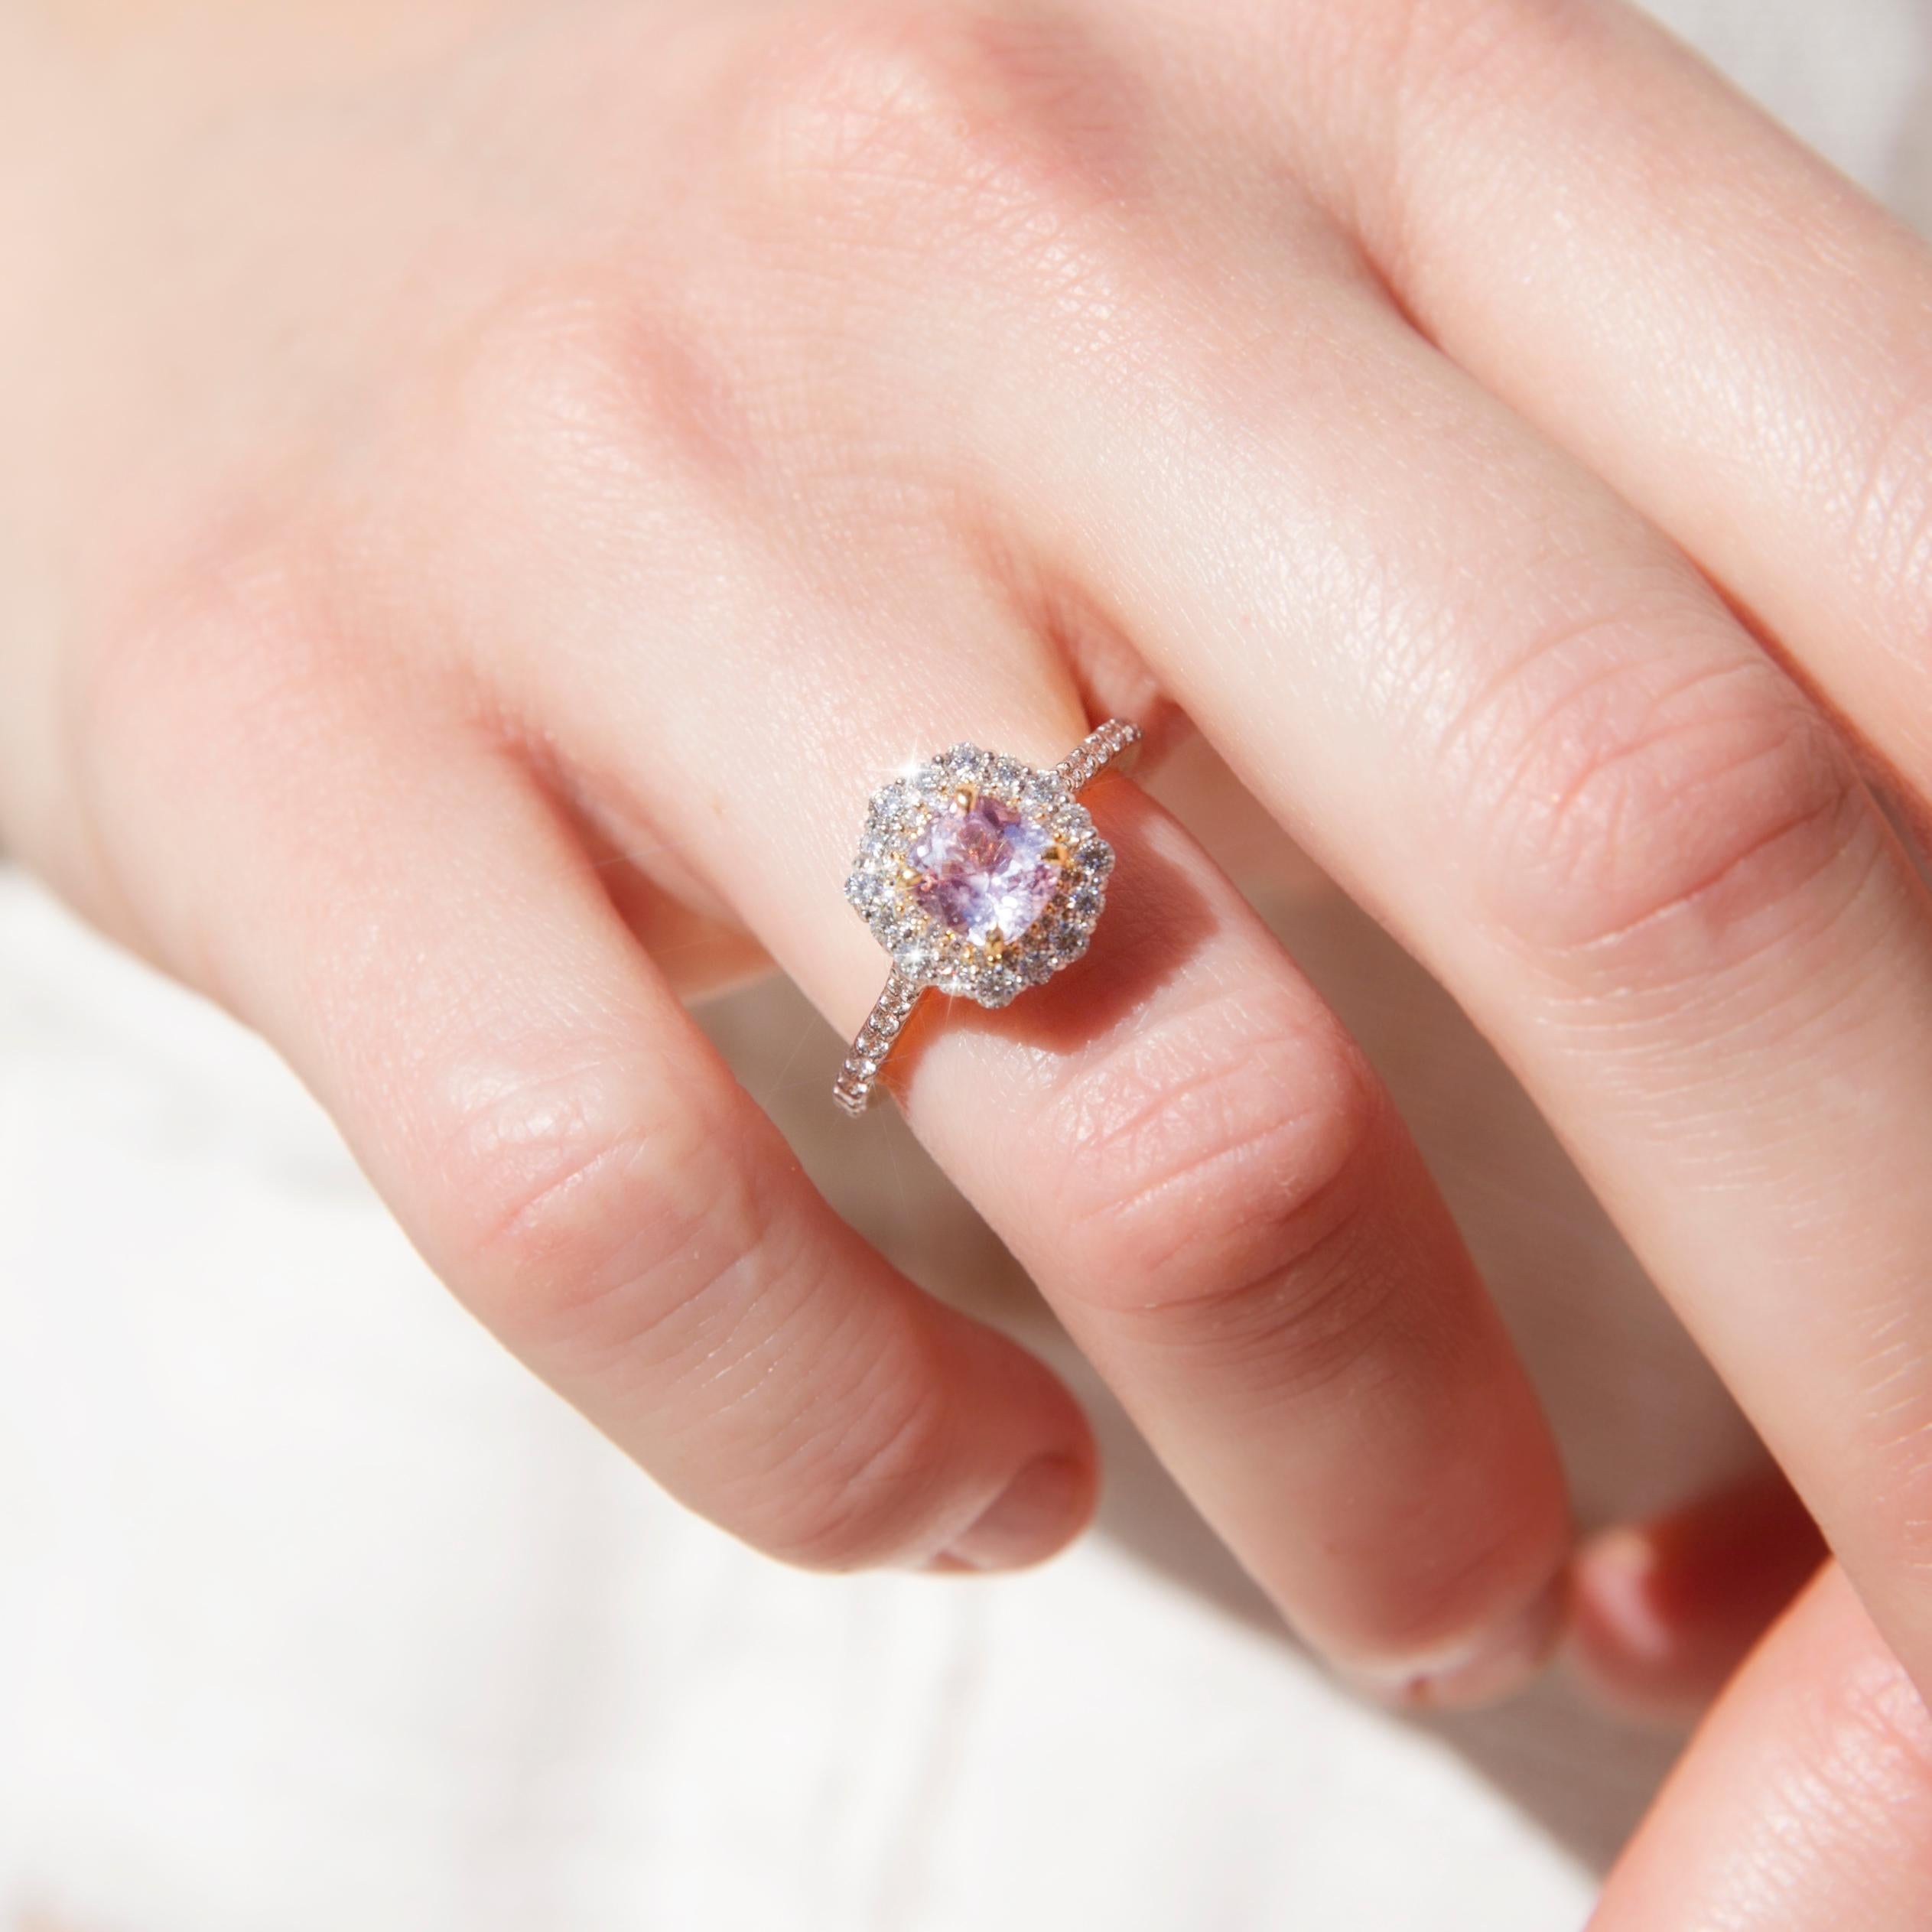 Forged in gleaming 18 carat gold, this stunning contemporary ring sees an enchanting halo cluster with a light pink sapphire set carefully within a shimmering border of round brilliant cut diamonds and with diamonds running down the elegant